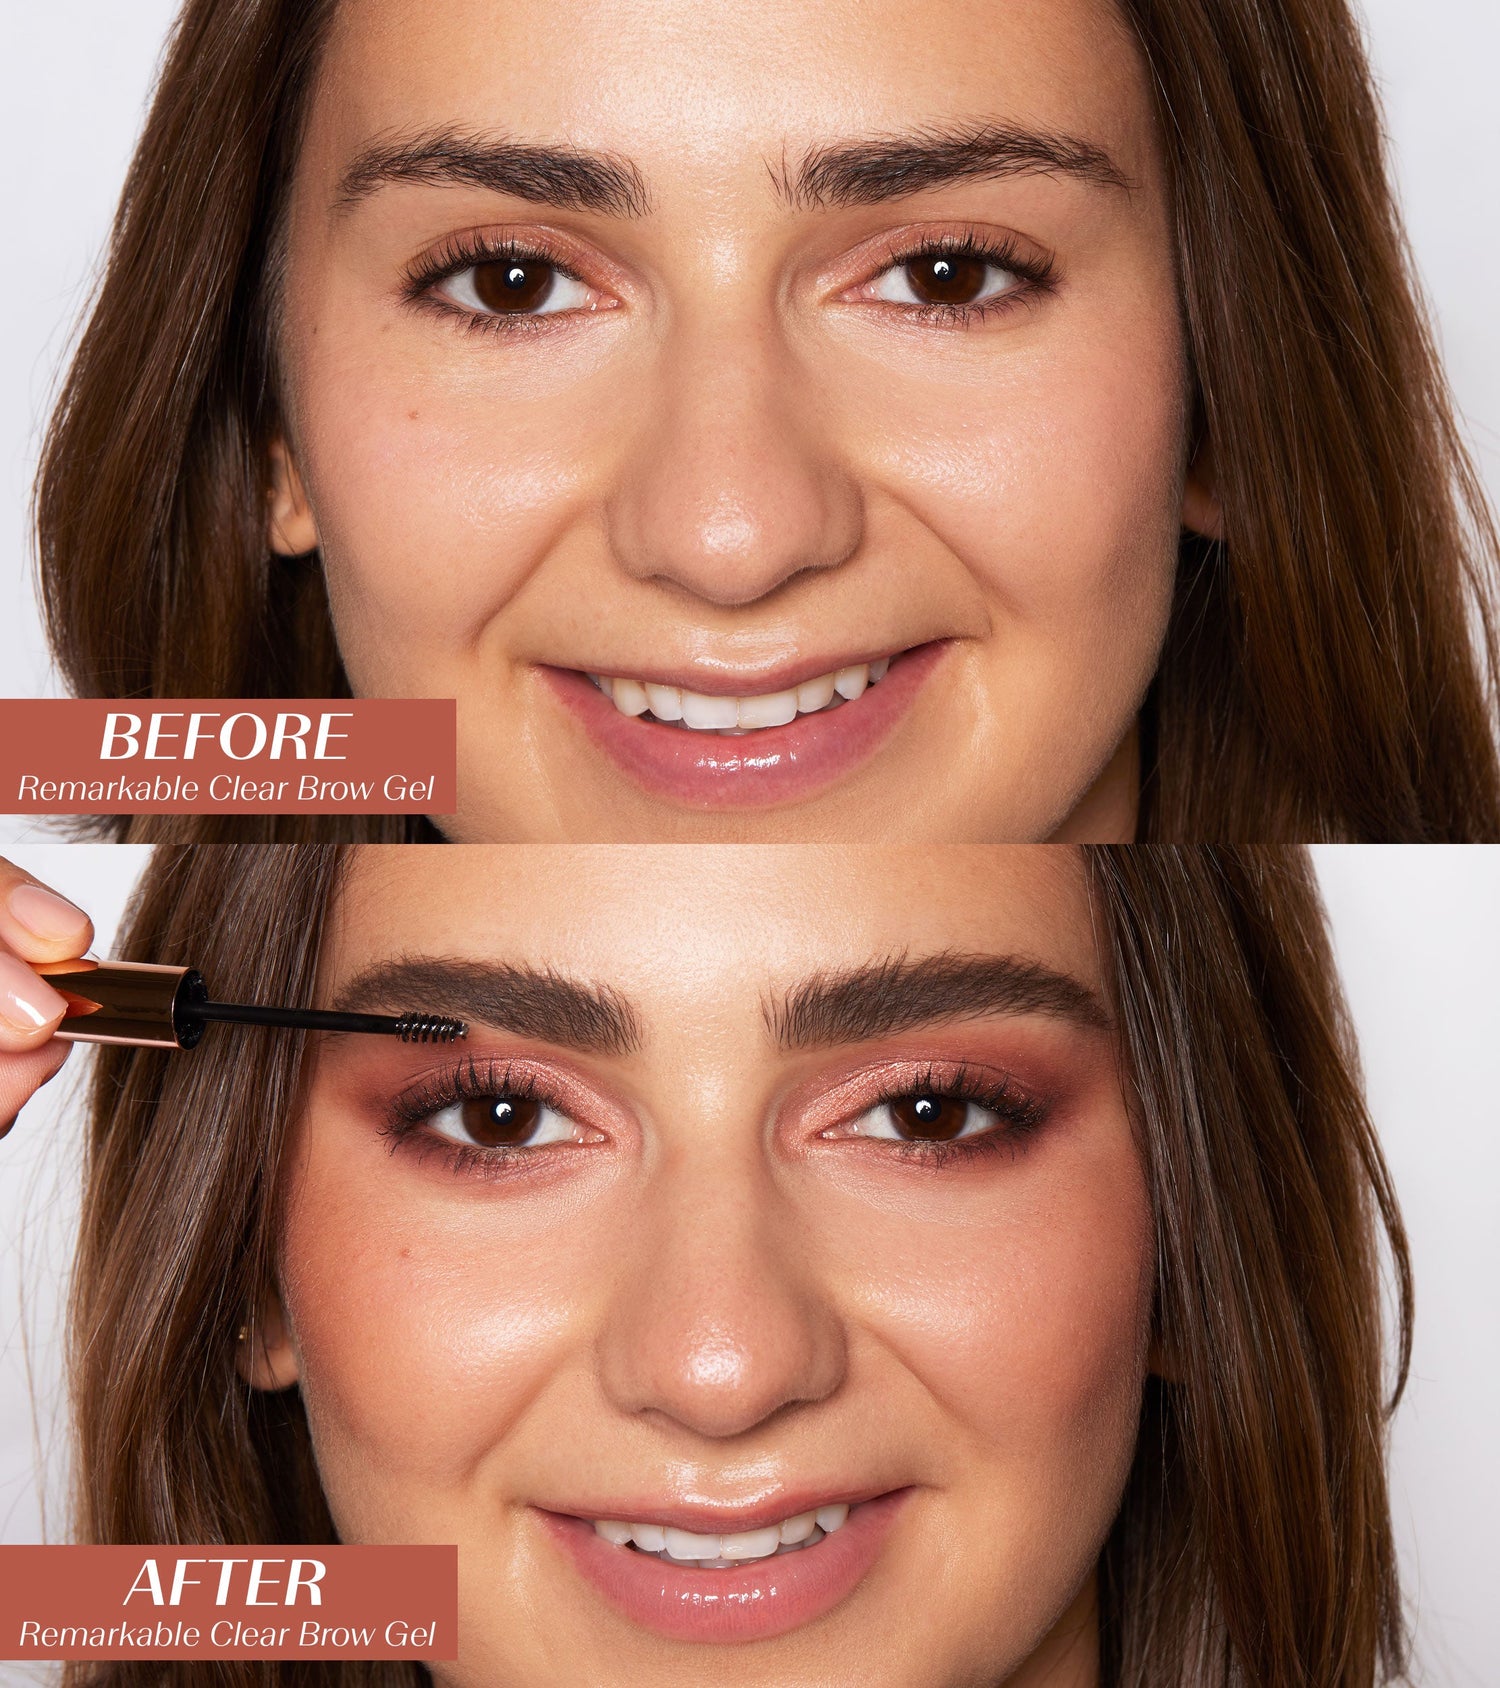 REMARKABLE BROW GEL Main Image featured